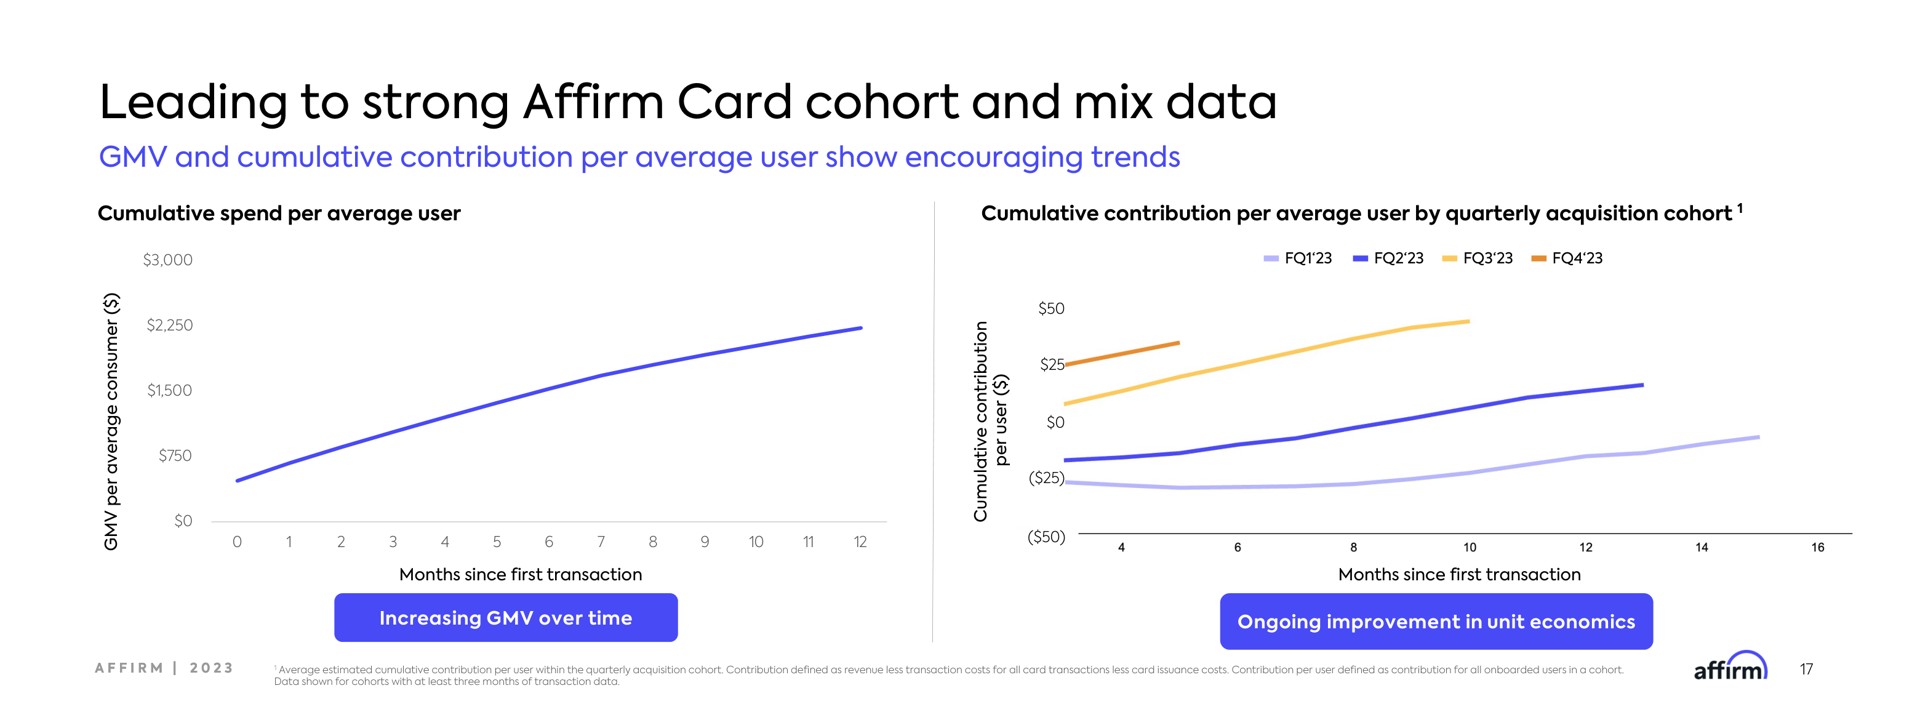 leading to strong affirm card cohort and mix data | Affirm